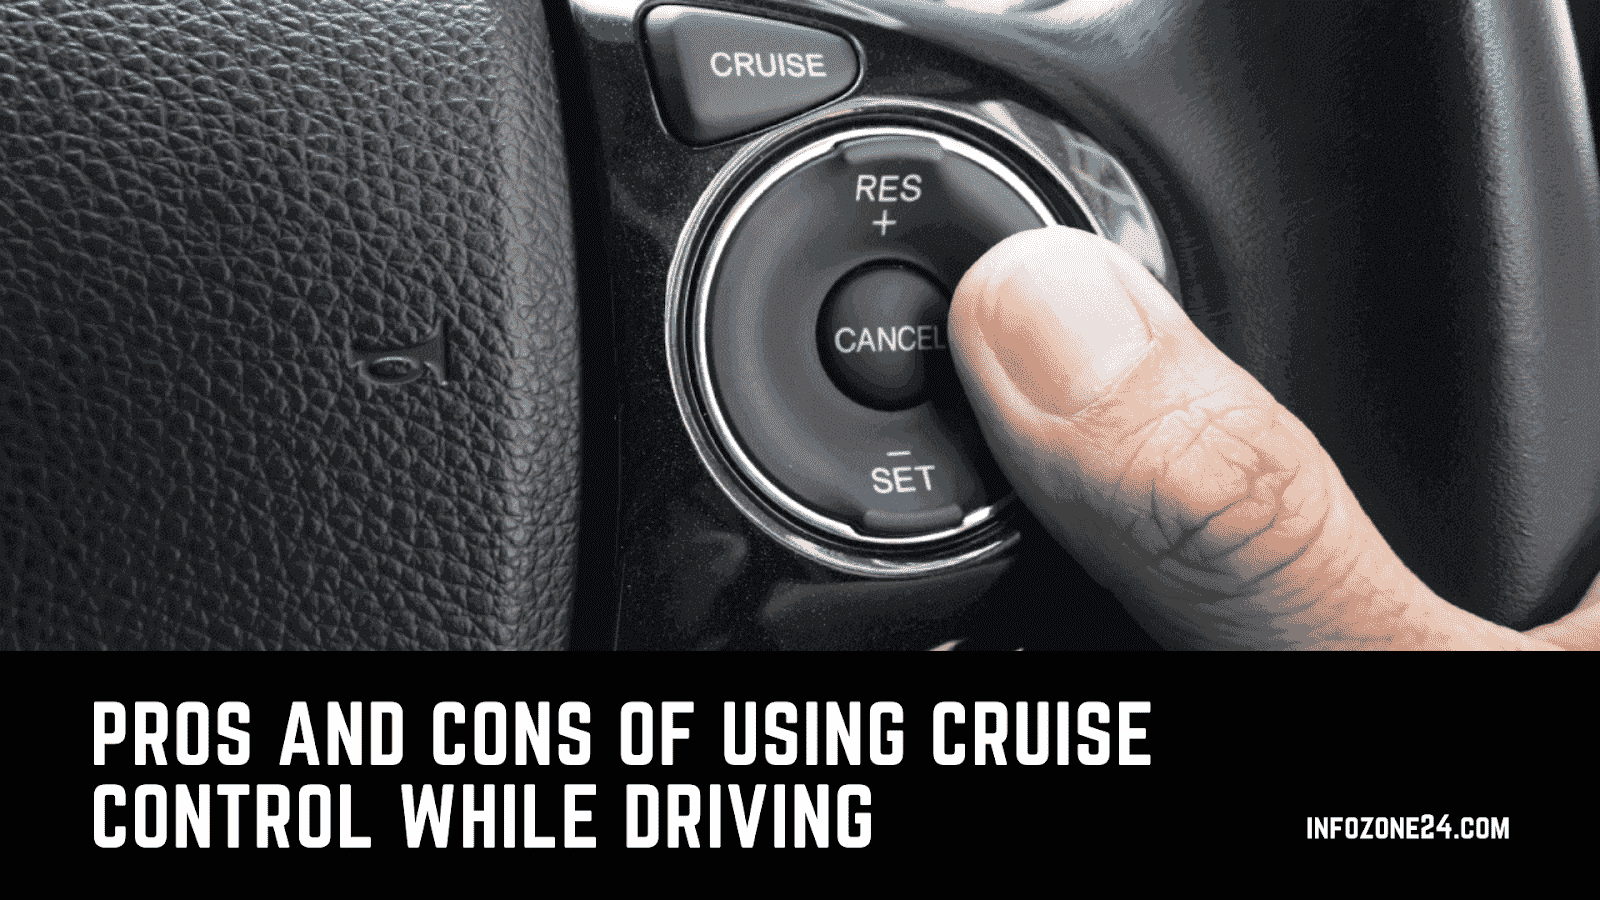 Pros and Cons of Using Cruise Control While Driving